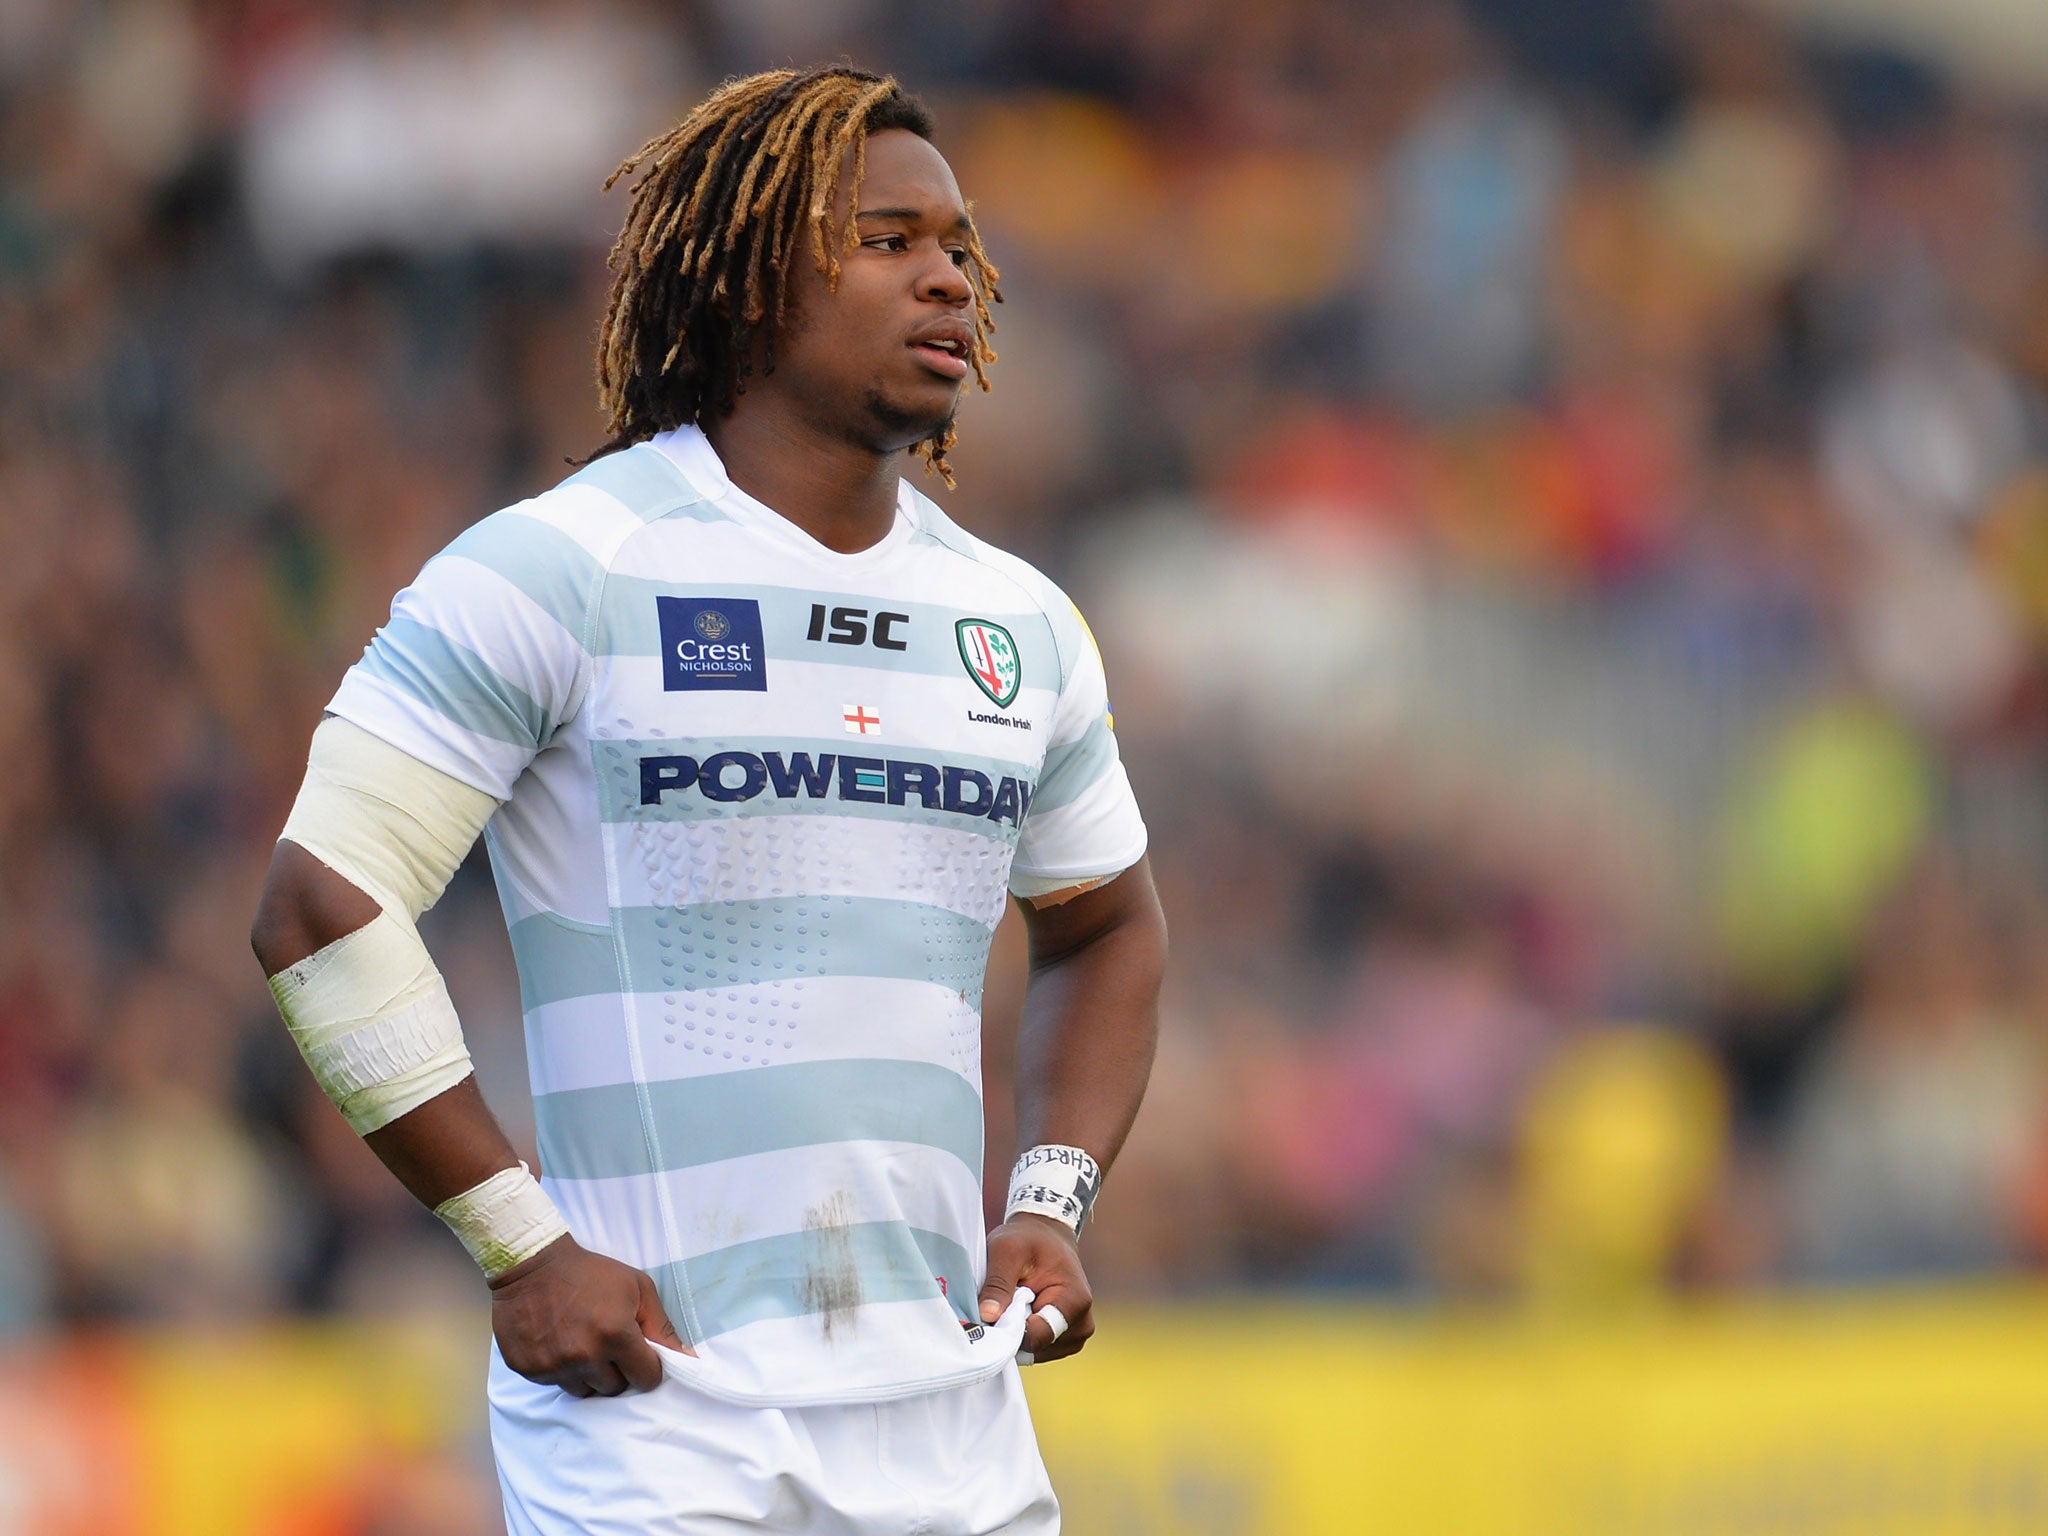 Marland Yarde has admitted that London Irish's self-imposed alcohol ban is to credit for win over Harlequins